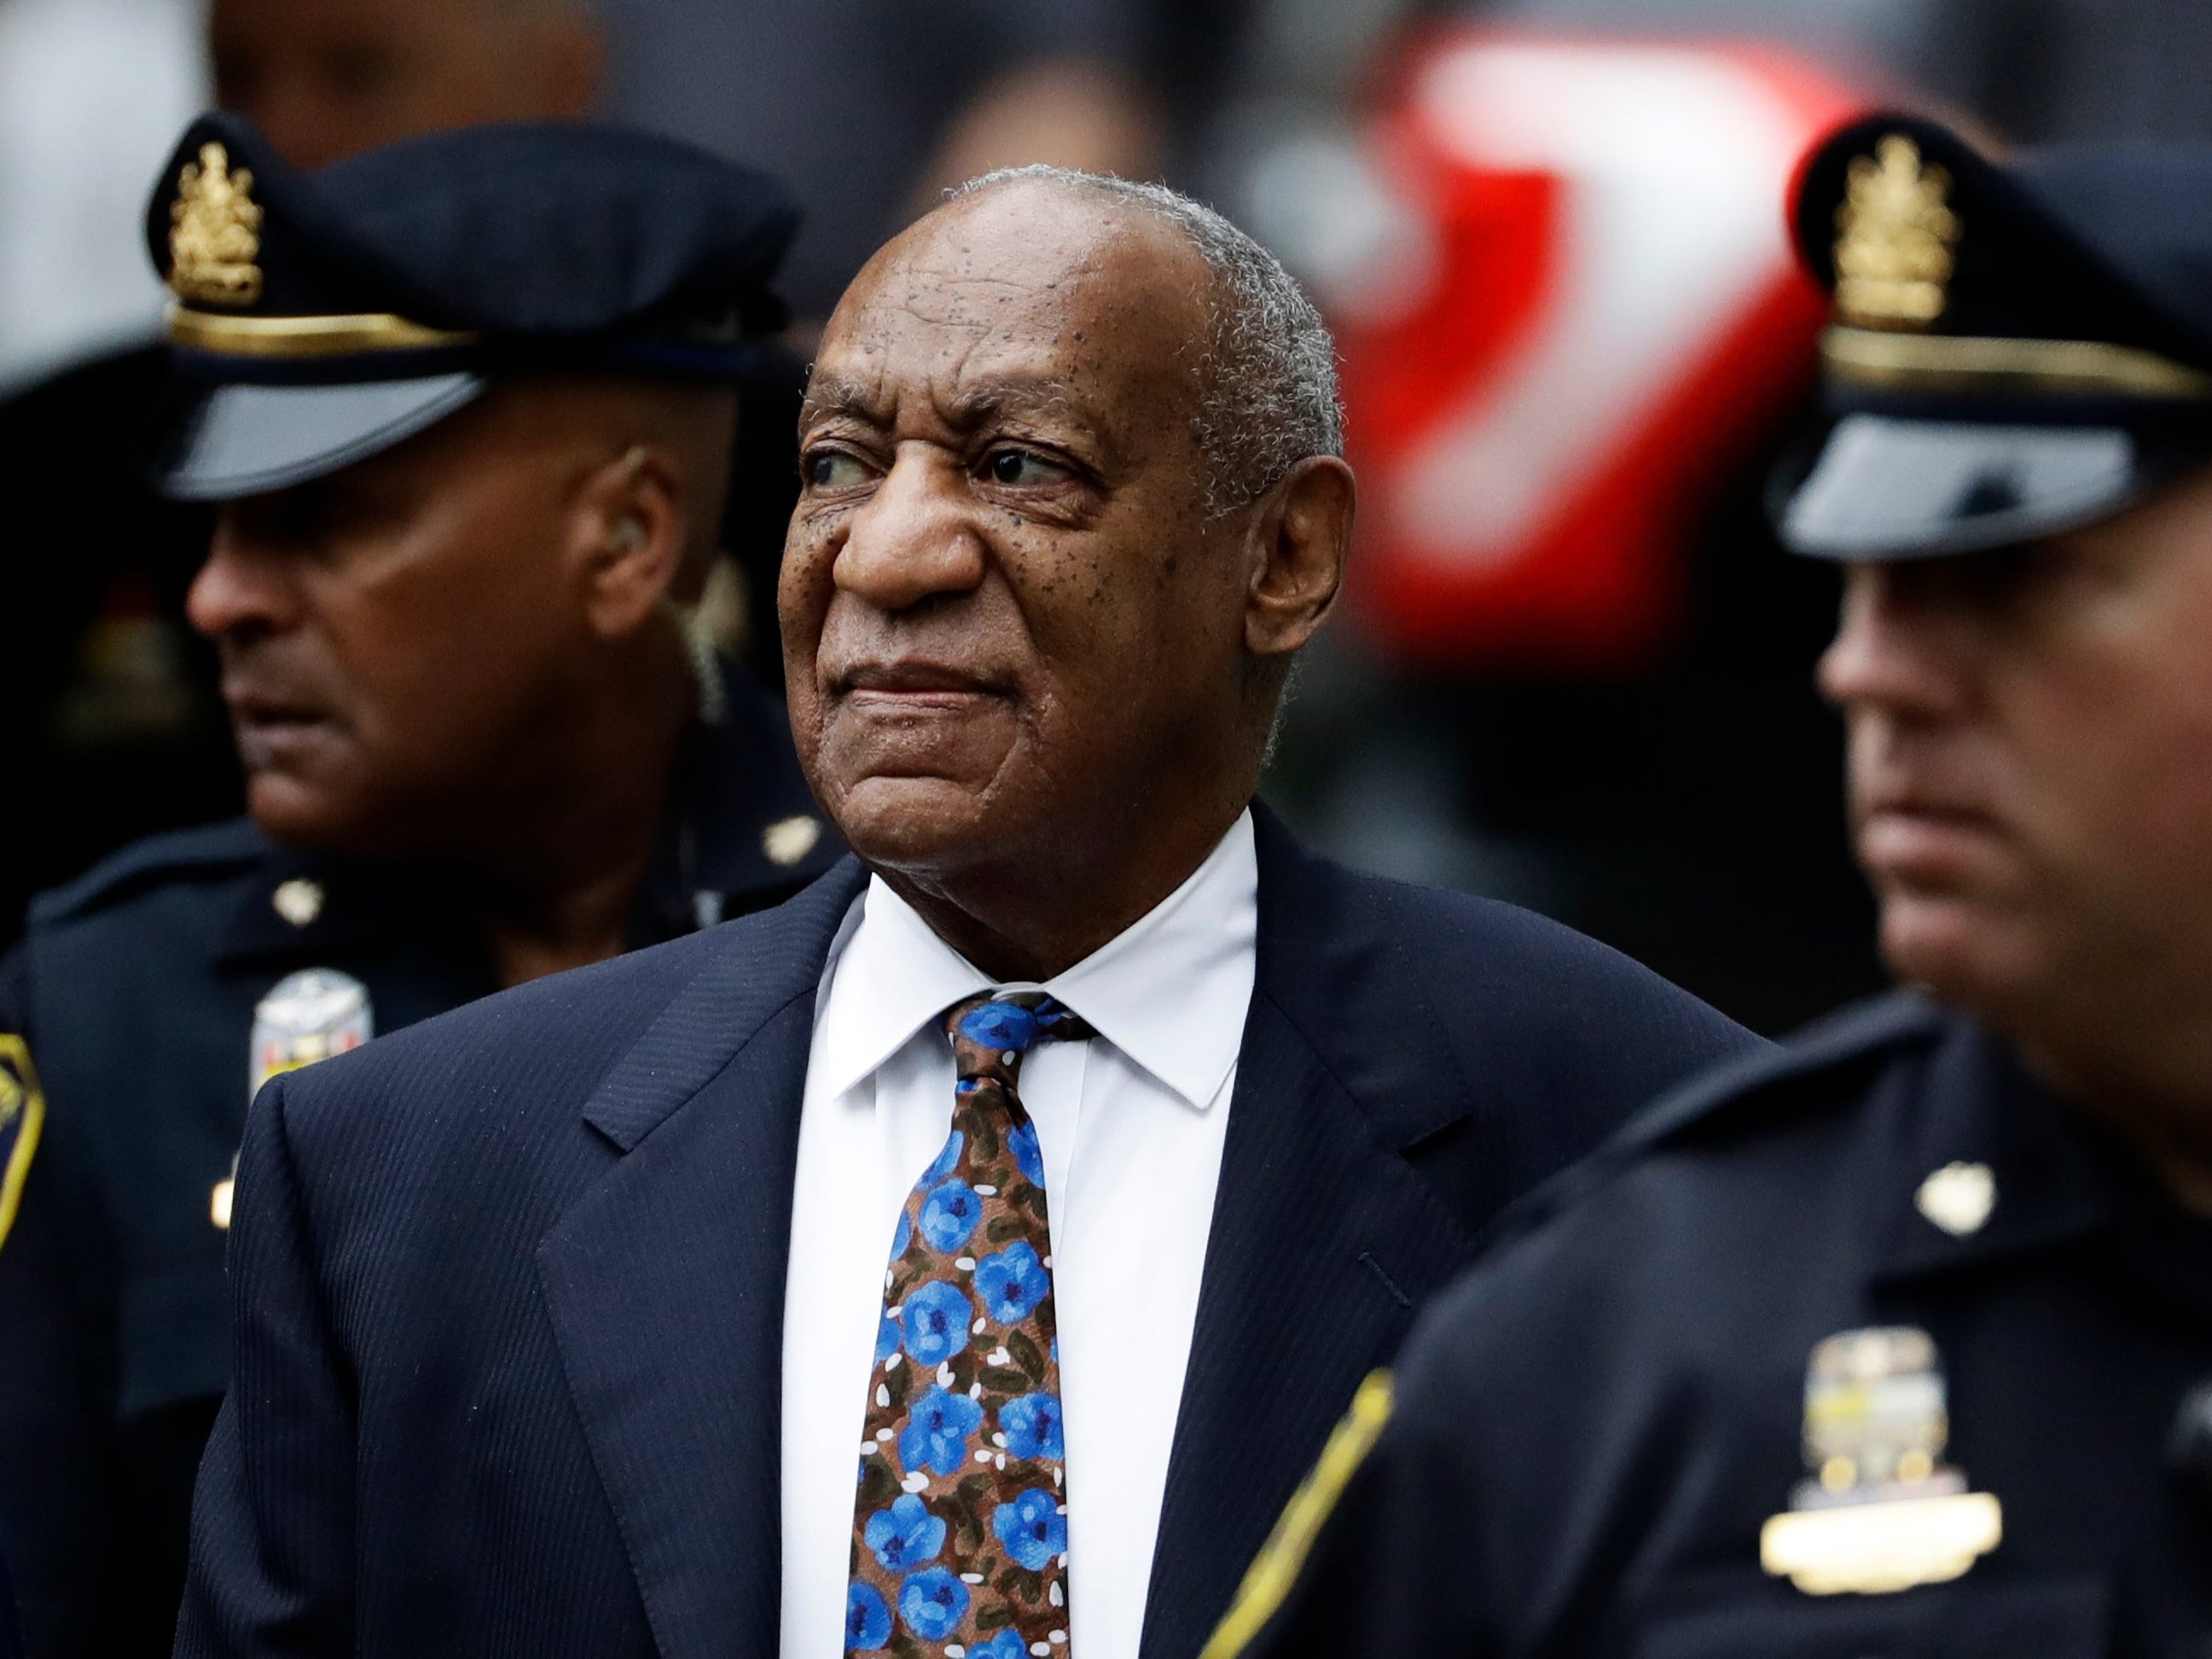 Bill Cosby arrives for his sentencing hearing at the Montgomery County Courthouse, in Norristown, Pennsylvania, on 24 September 2018